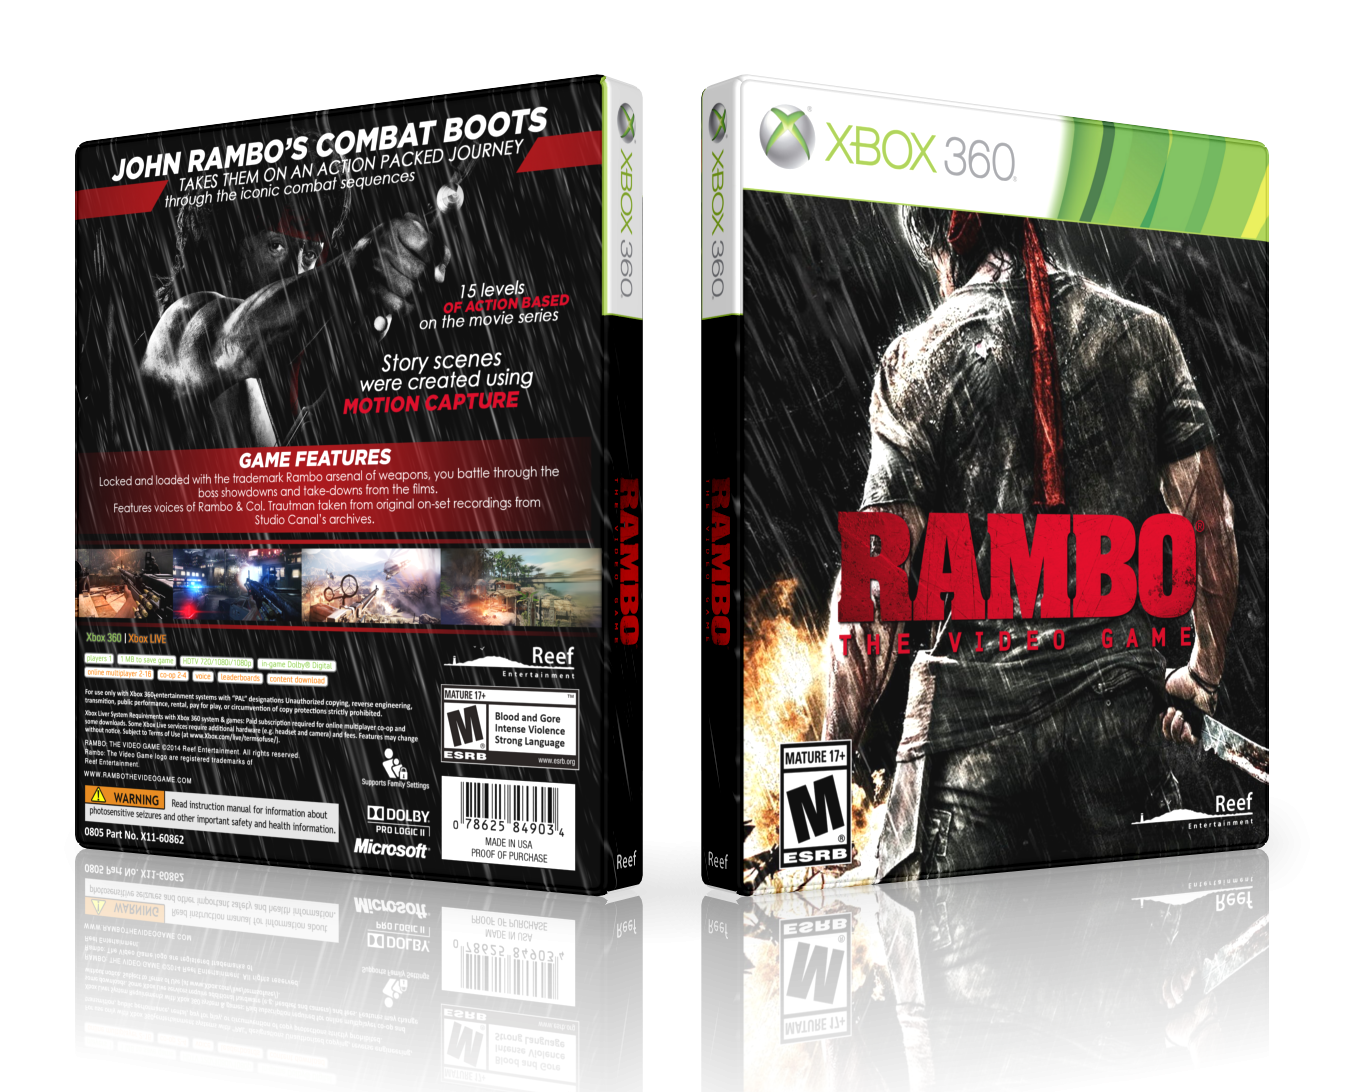 Rambo: The Video Game box cover